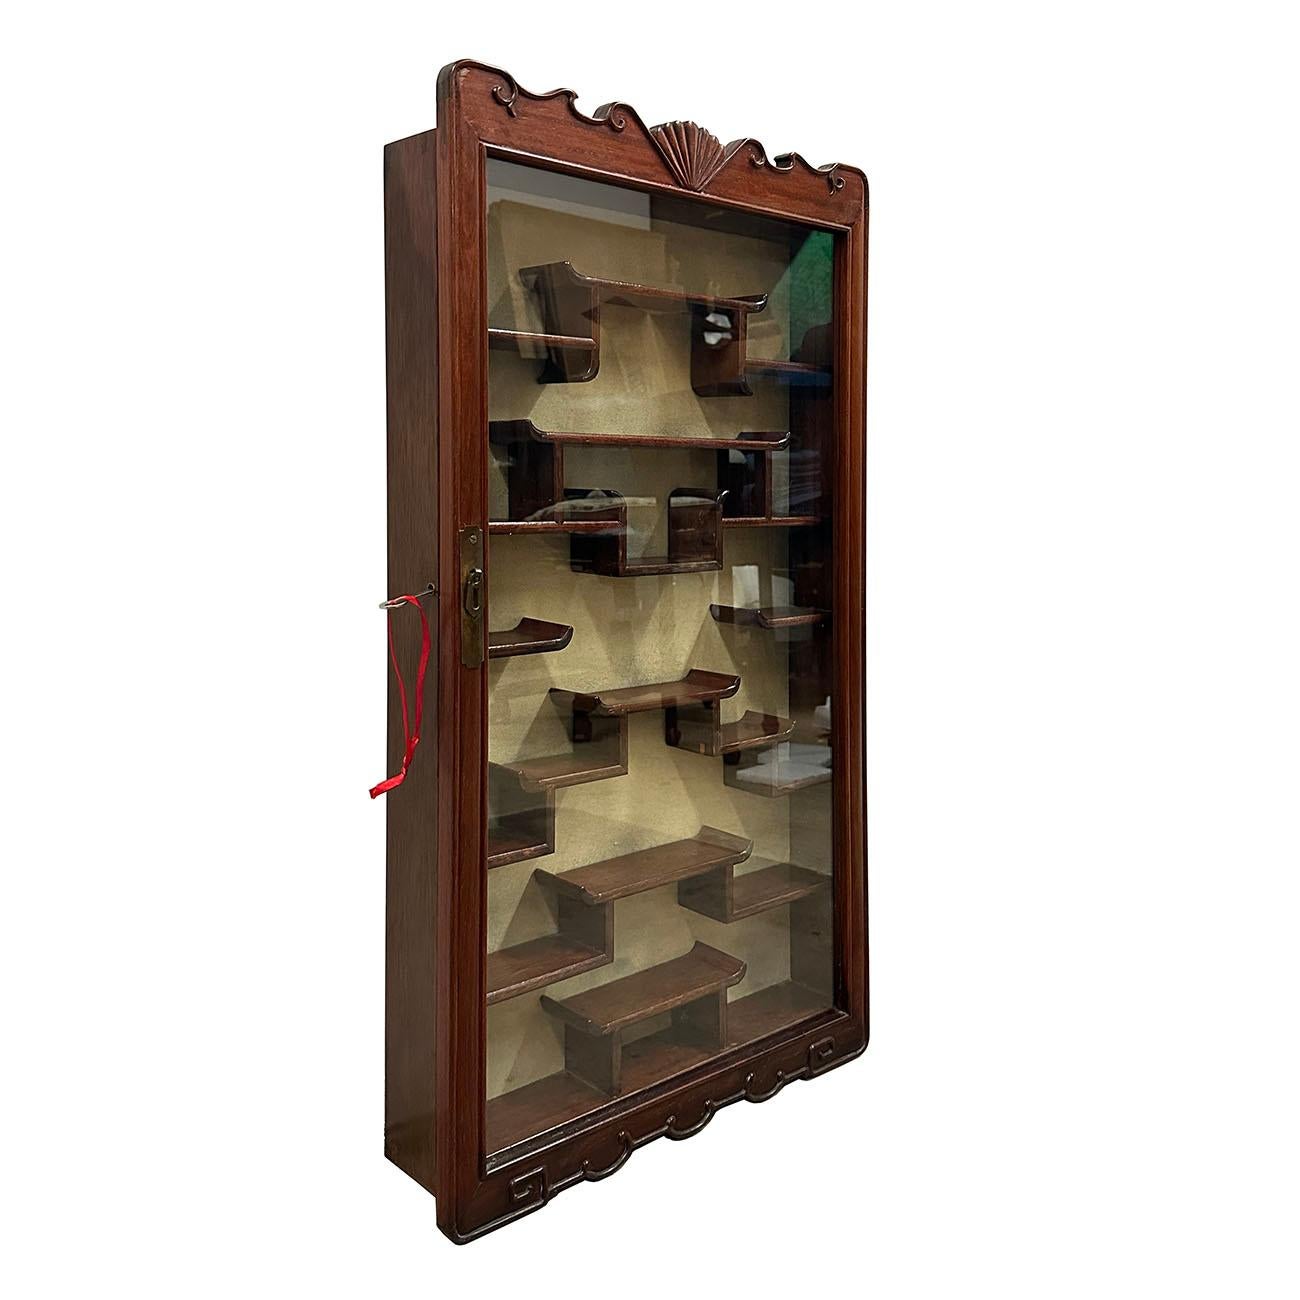 This Vintage Chinese Wall Mounted Curio cabinet is hand made and hand carved with one single glass door on the front. It is perfect for all your Treasures & Miniatures. It has 23 shelves for display your treasures. Mounted on a wall, solid hardwood